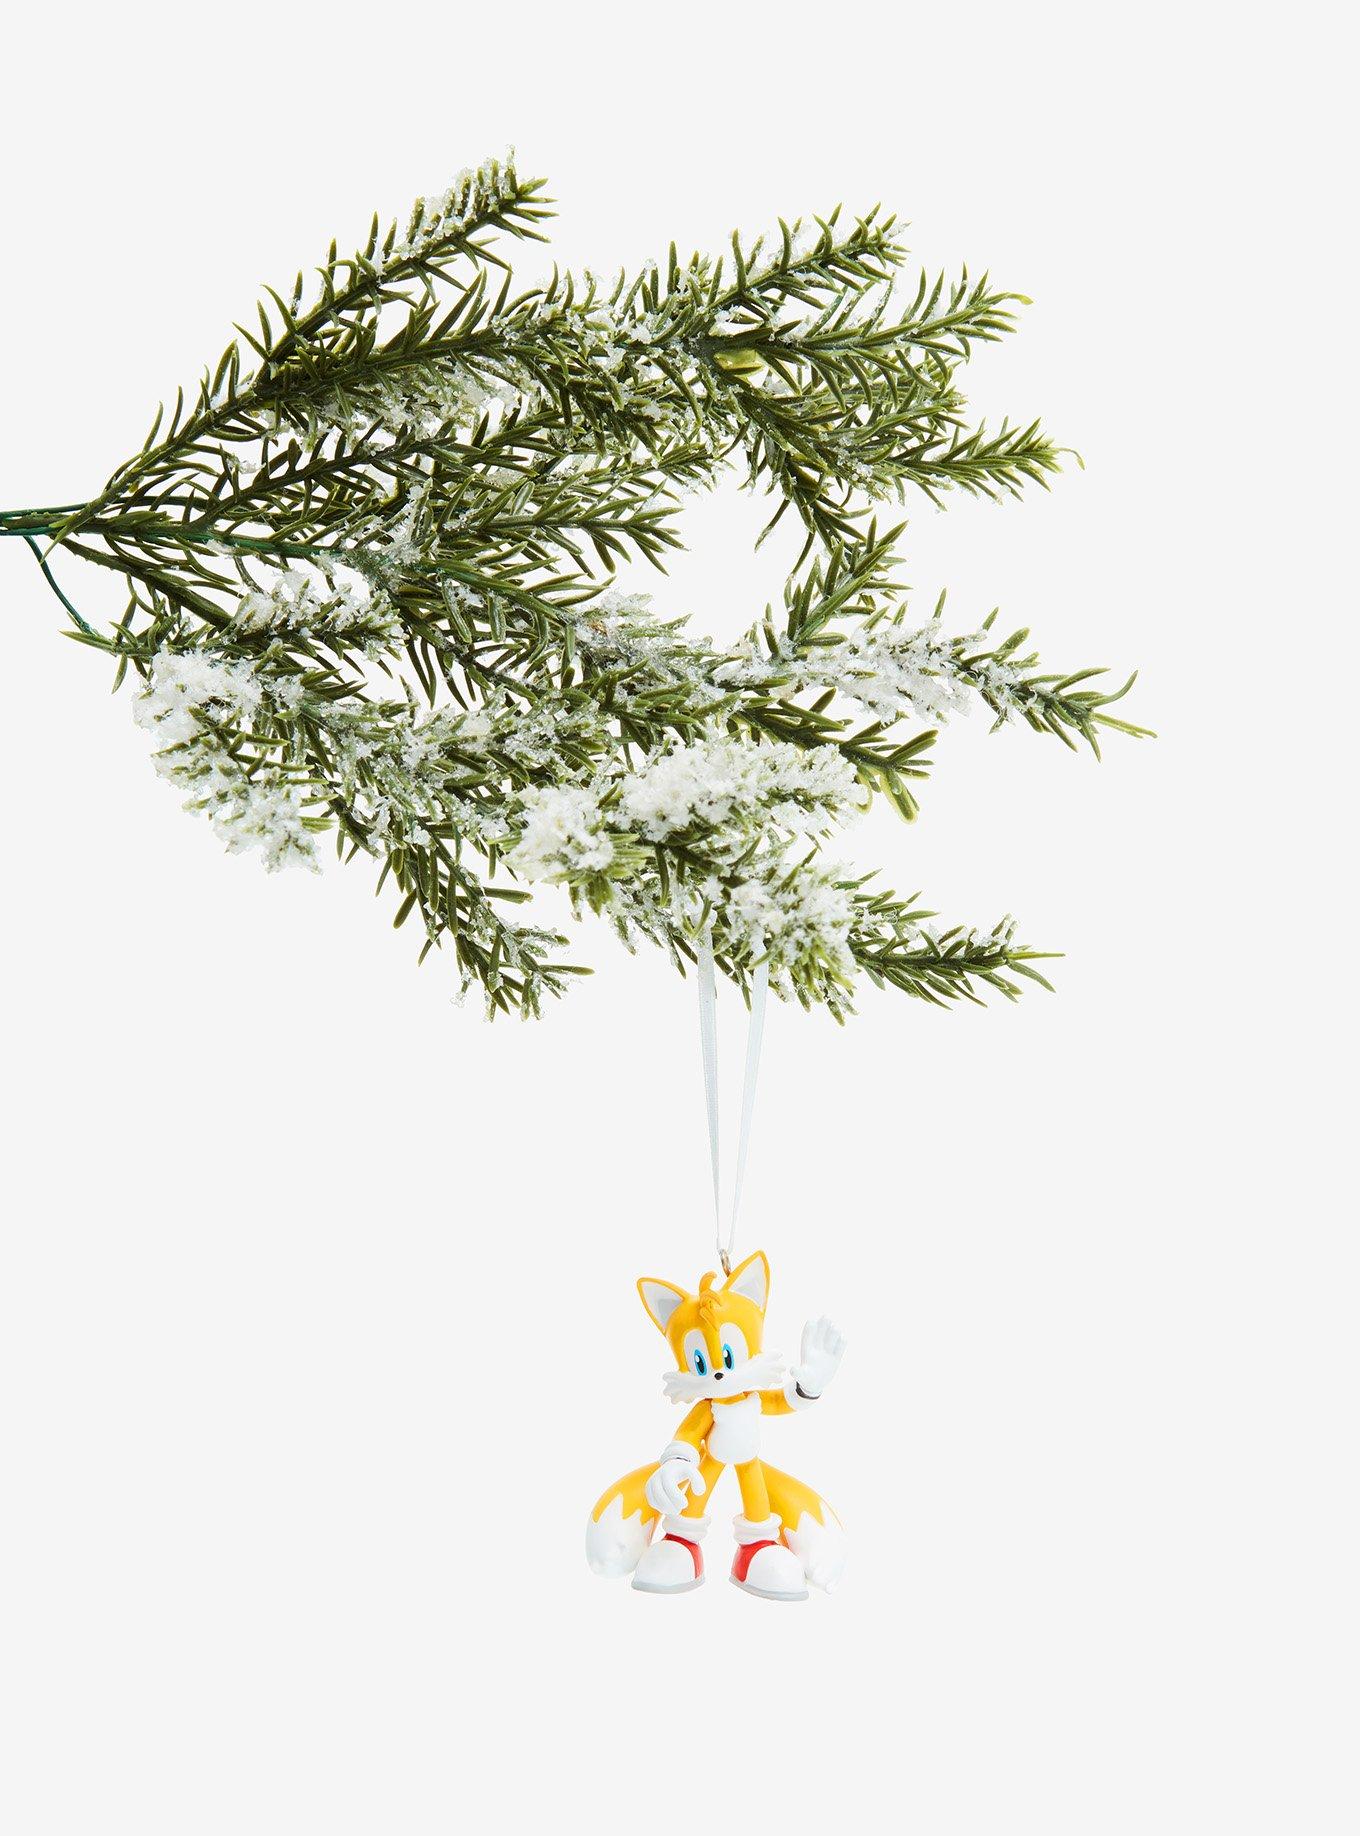 2021 Sonic the Hedgehog Sonic and Tails Hallmark Christmas Ornament -  Hooked on Hallmark Ornaments